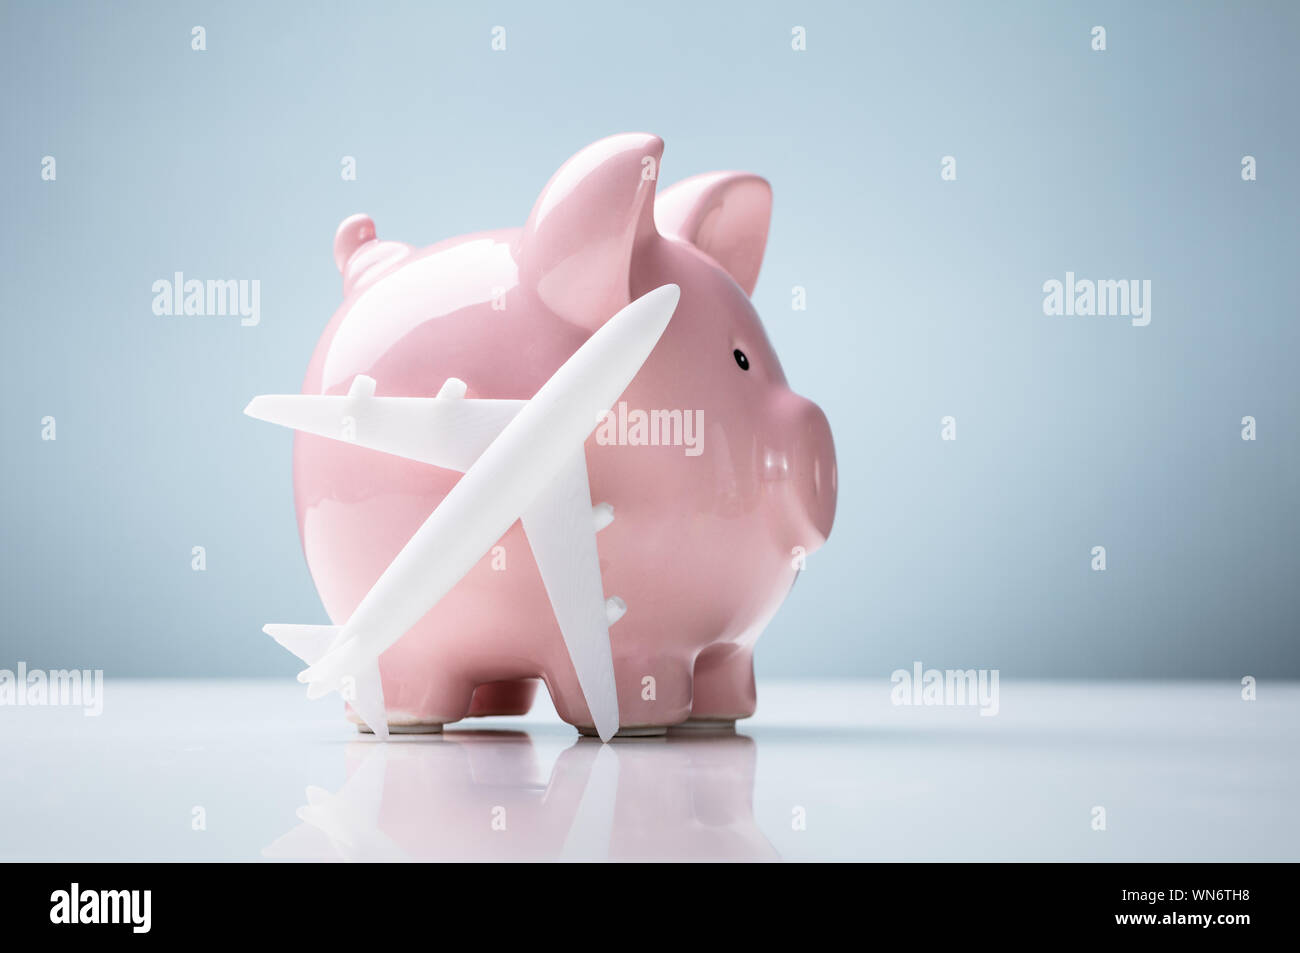 Close-up Of Piggy Bank With Airplane Over White Desk Against Blue Background Stock Photo